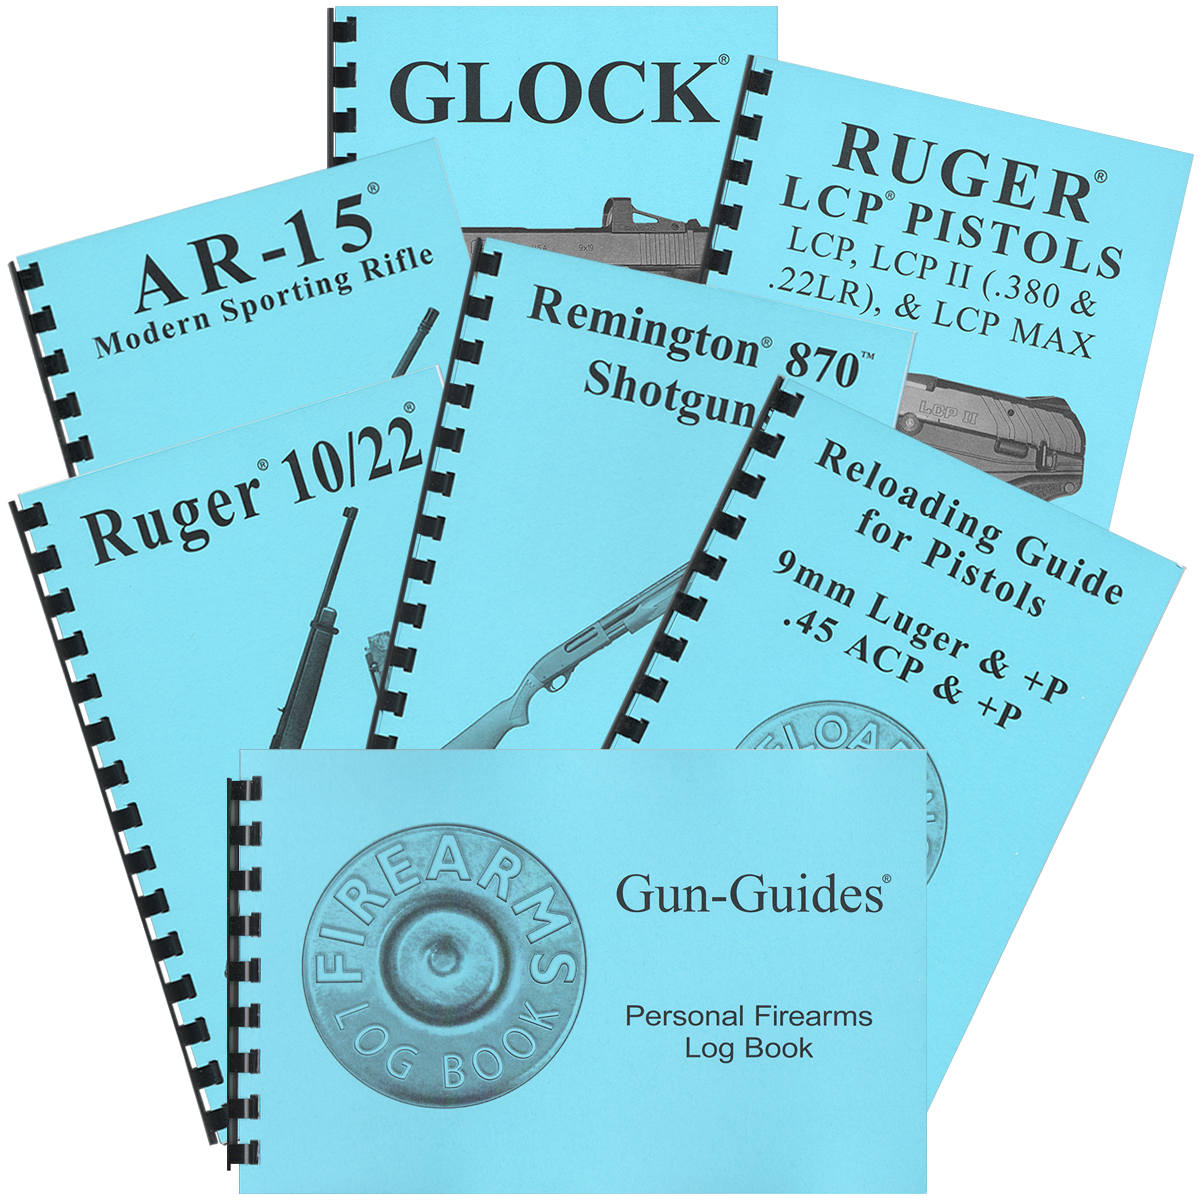 ALL DEALER GUN-GUIDES Disassembly & Reassembly, Ruger Complete Guides, and Reloading Guides - ALL ON ONE PAGE with (12) as the default quantity. Simply change default to your required amount.